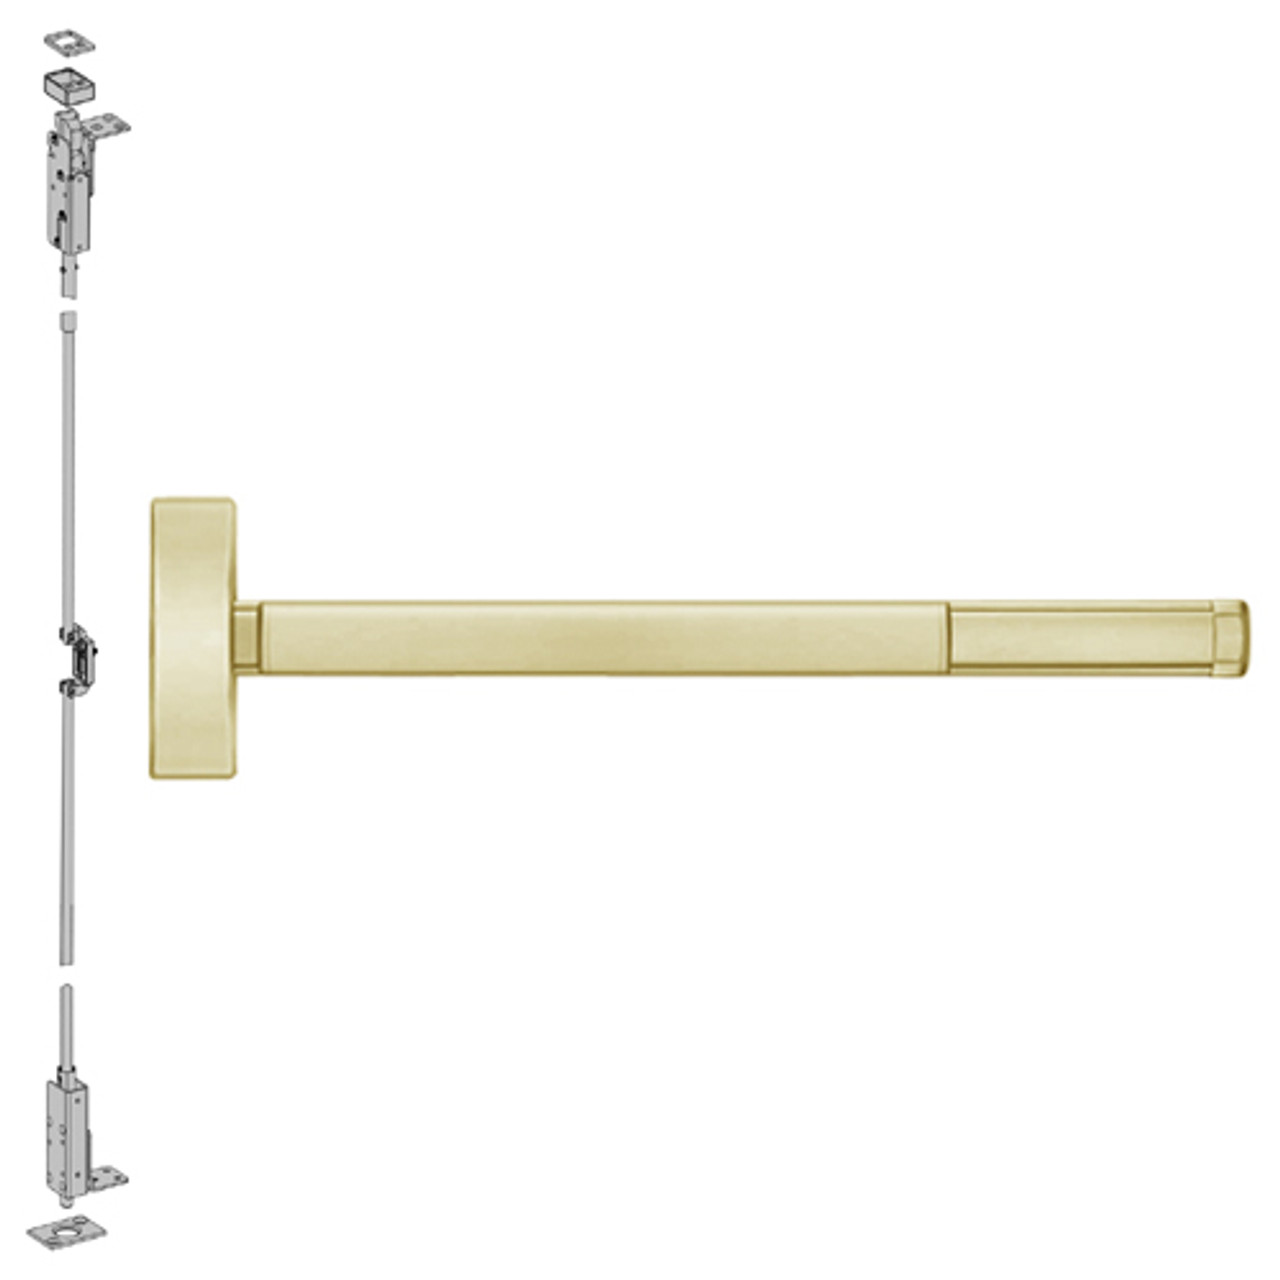 DE2703-606-48 PHI 2700 Series Non Fire Rated Wood Door Concealed Vertical Exit Device Prepped for Key Retracts Latchbolt in Satin Brass Finish